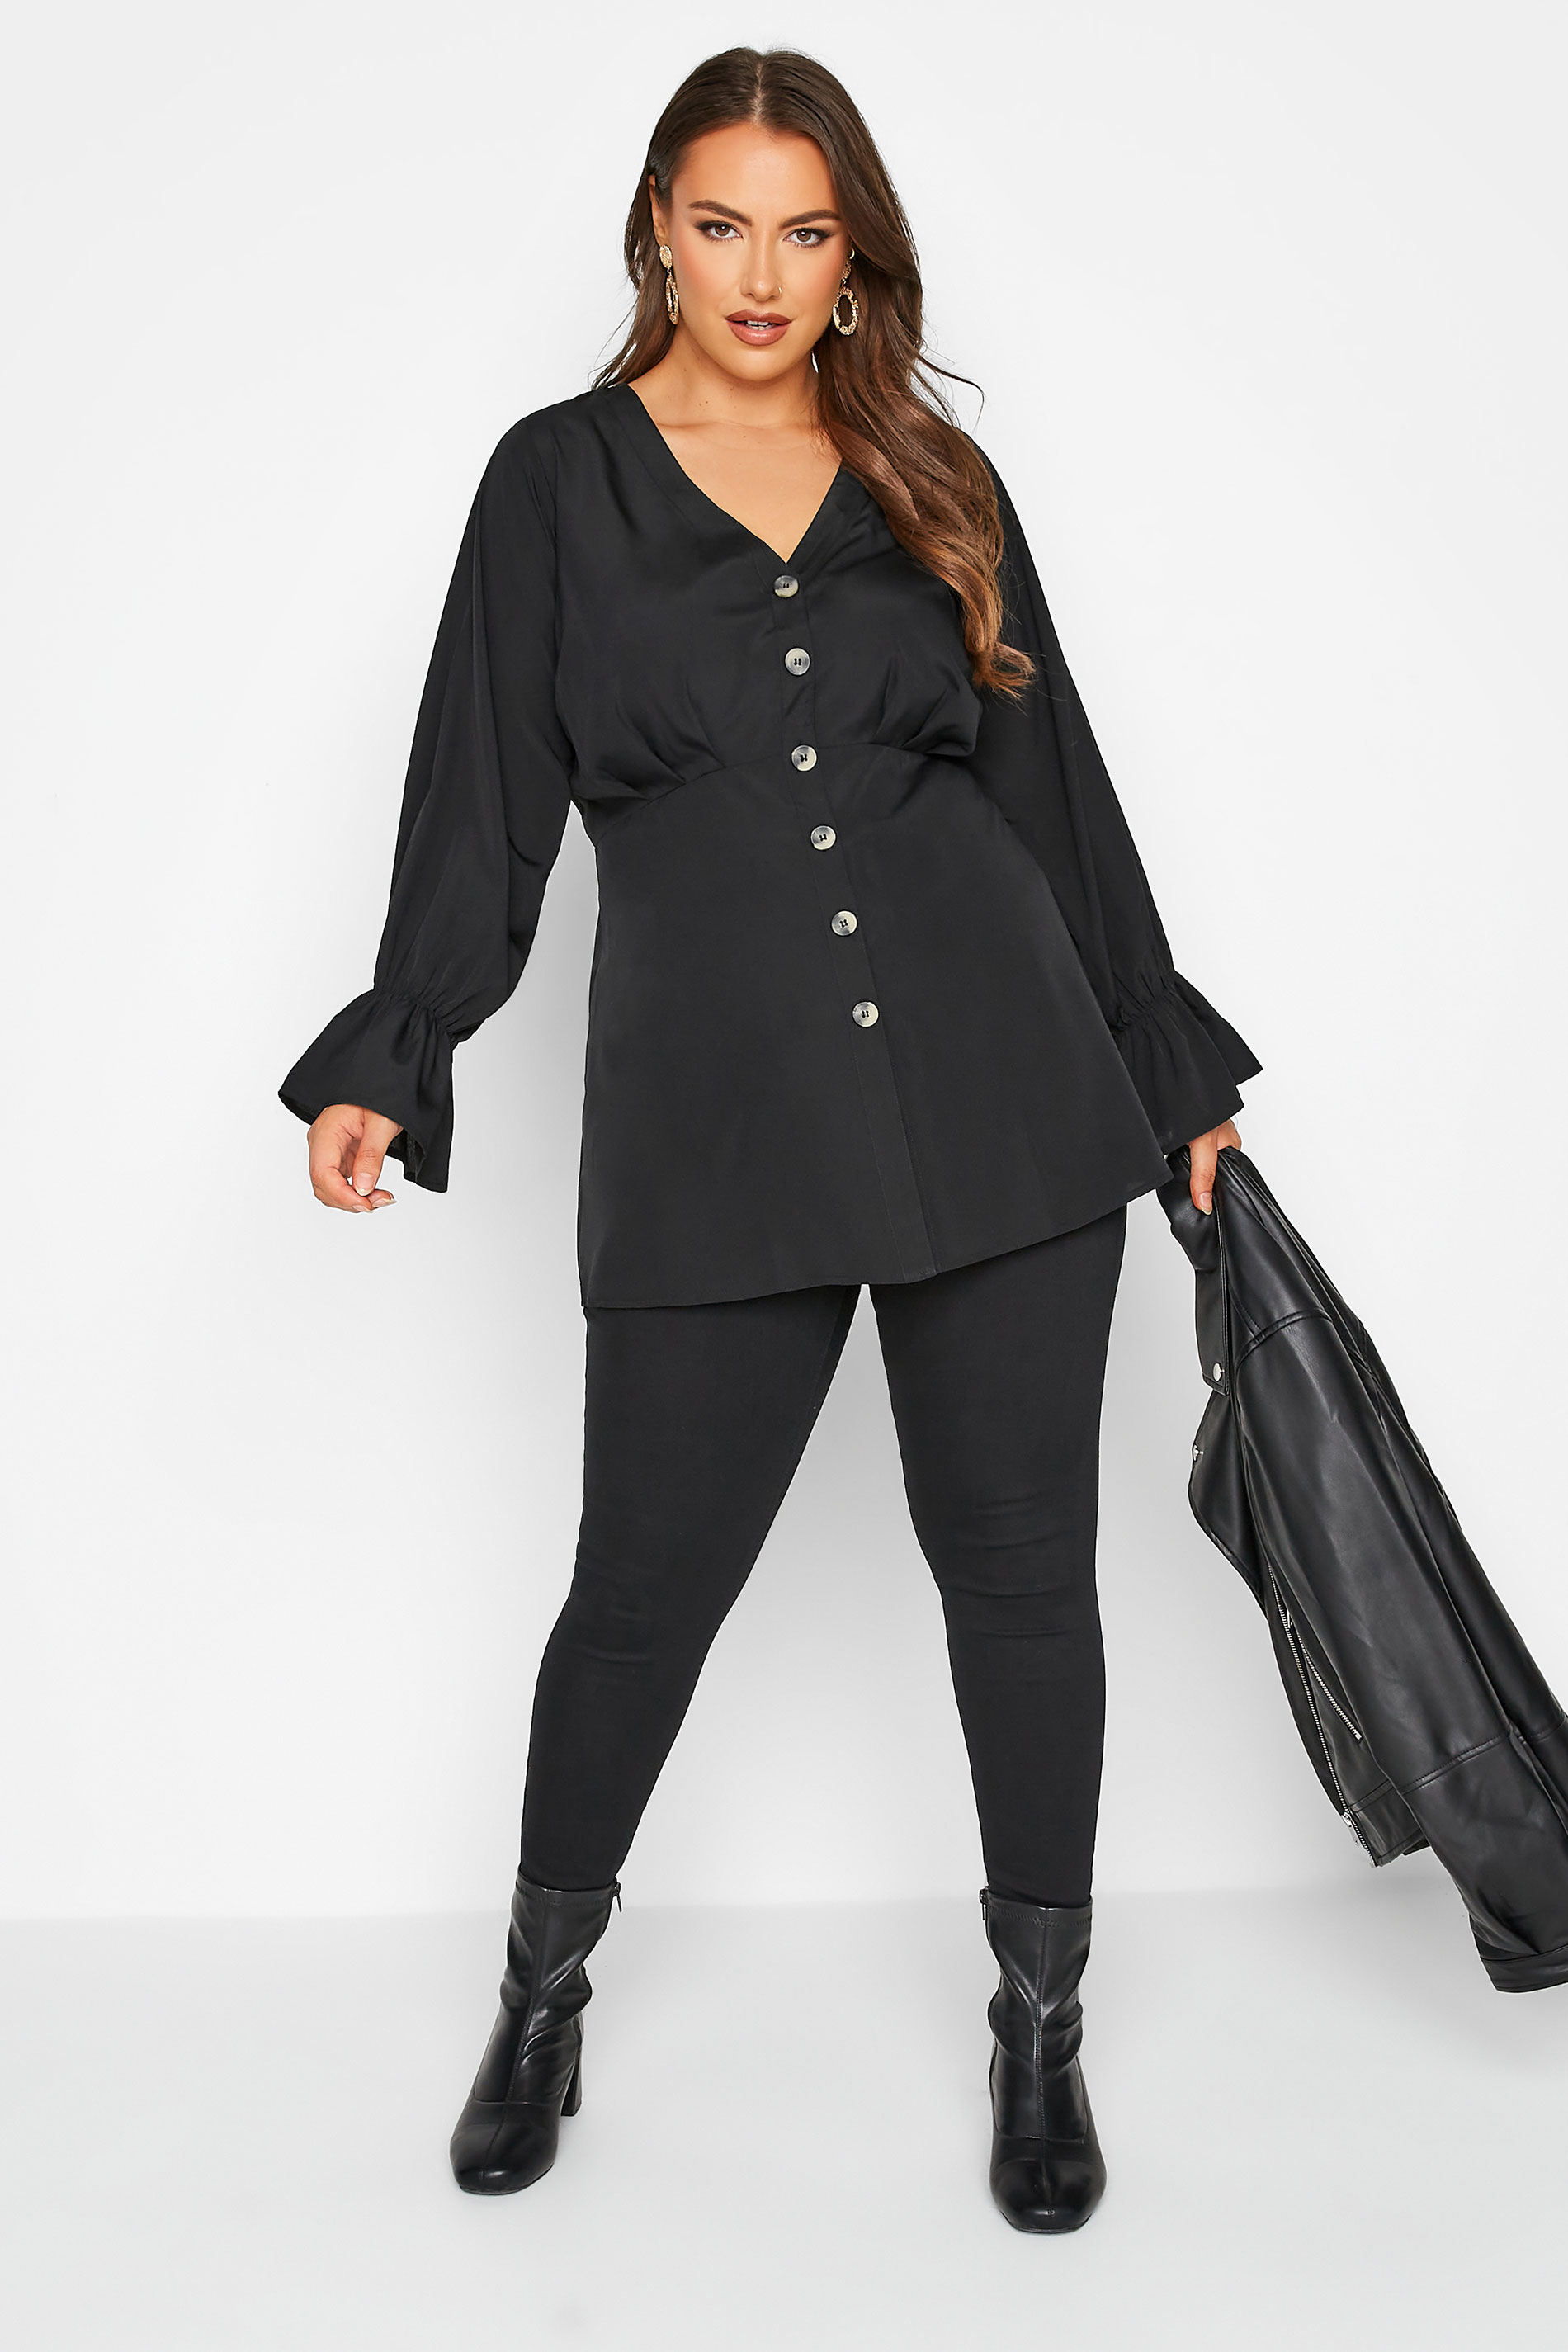 LIMITED COLLECTION Plus Size Black Long Sleeve Button Blouse | Yours Clothing 2